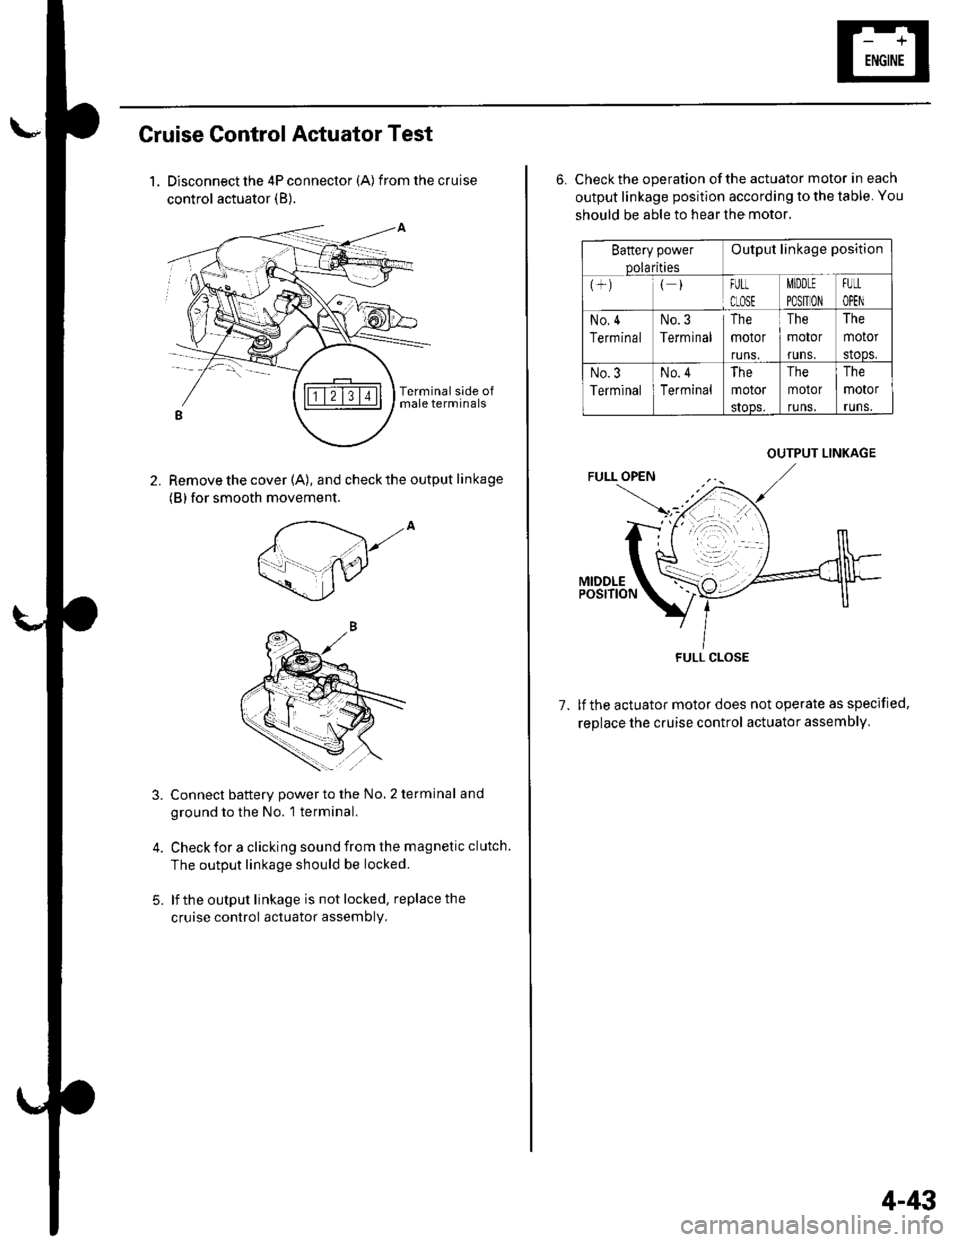 HONDA CIVIC 2003 7.G User Guide Cruise Control Actuator Test
1. Disconnect the 4P connector (A) from the cruise
control actuator (B).
Remove the cover (A), and check the output linkage
(B) for smooth movement.
2.
,to
5.
Connect batt